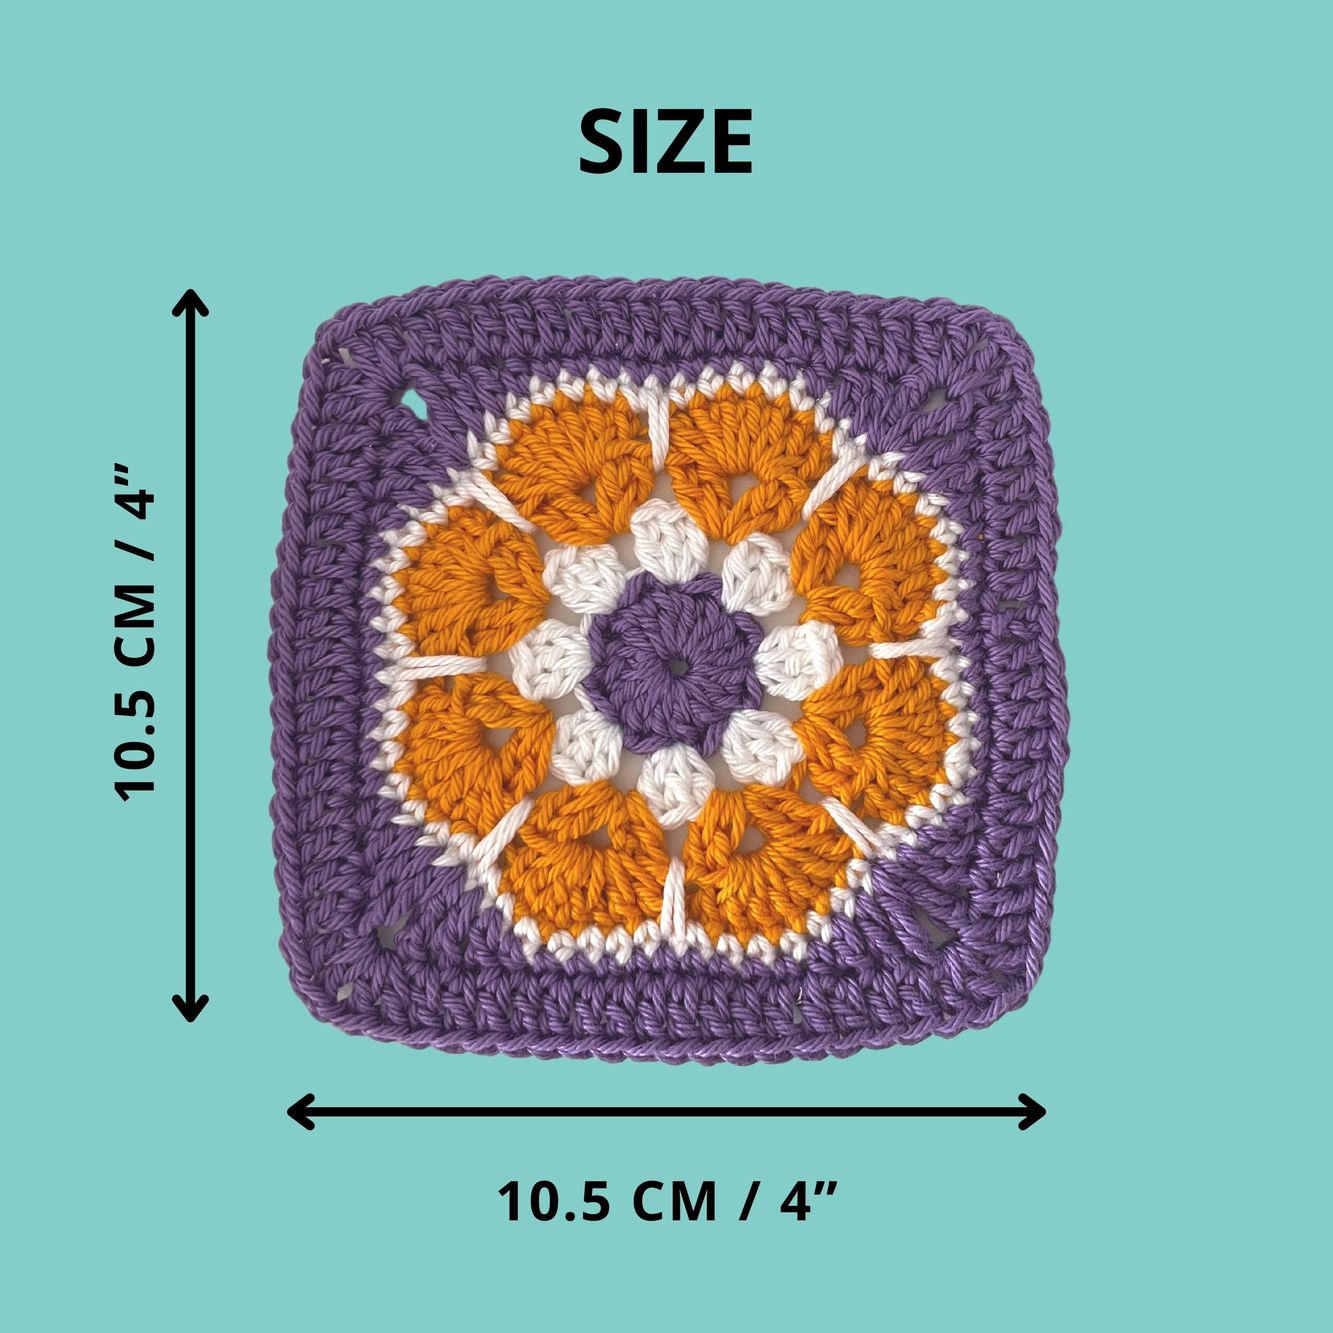 Size of Granny square African flower crochet pattern